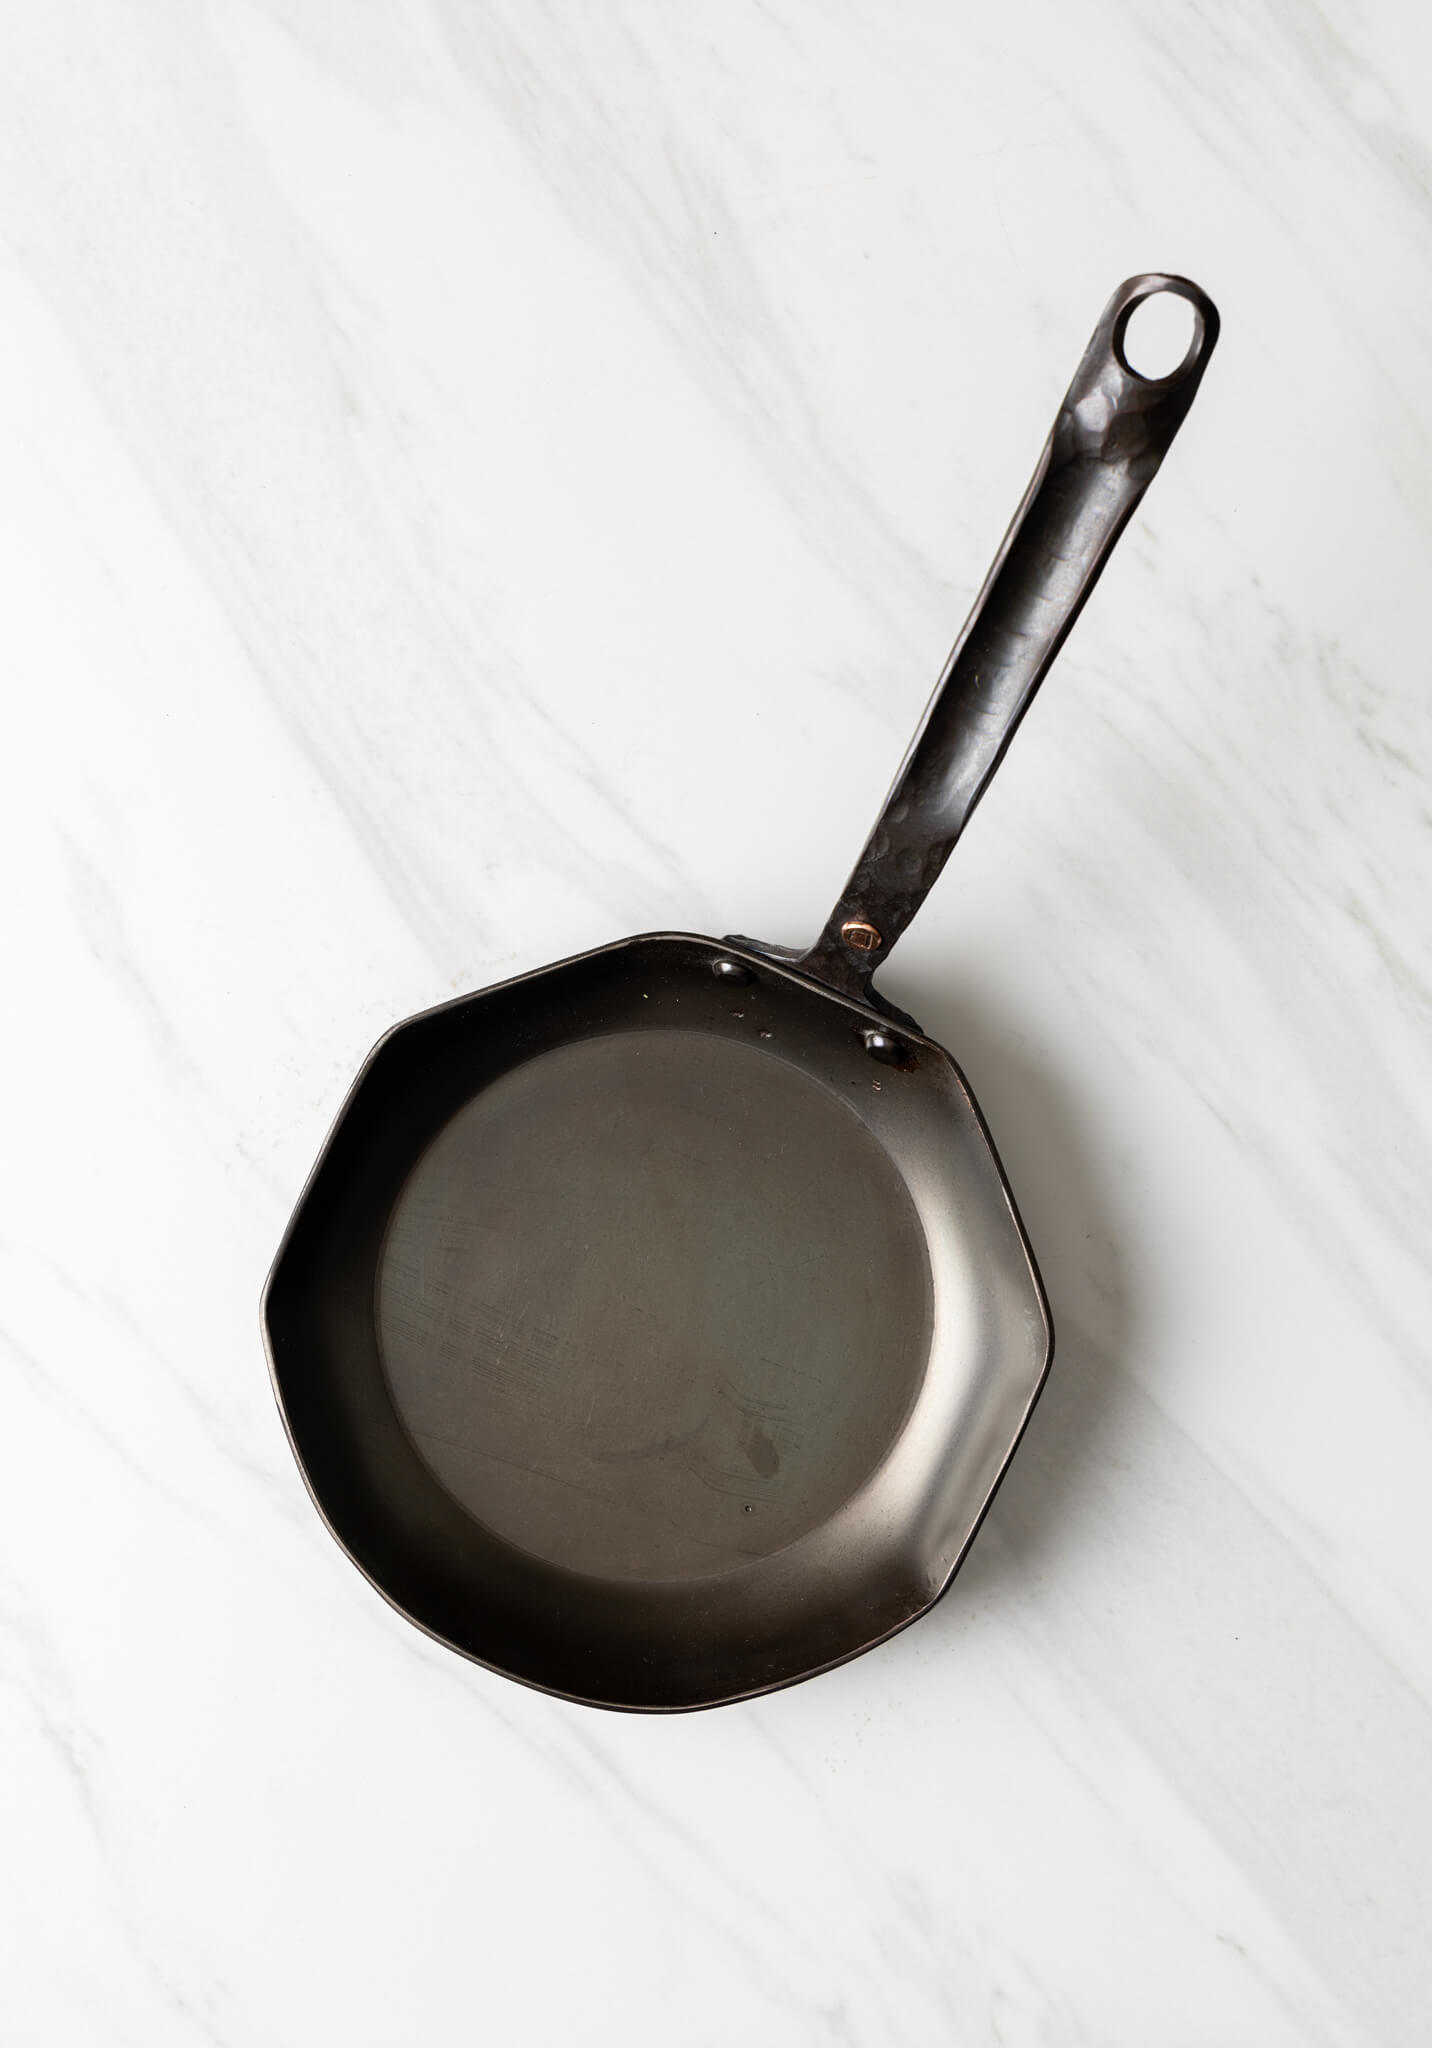 Made in's Carbon Steel Pan Review: the Perfect Hybrid Cookware